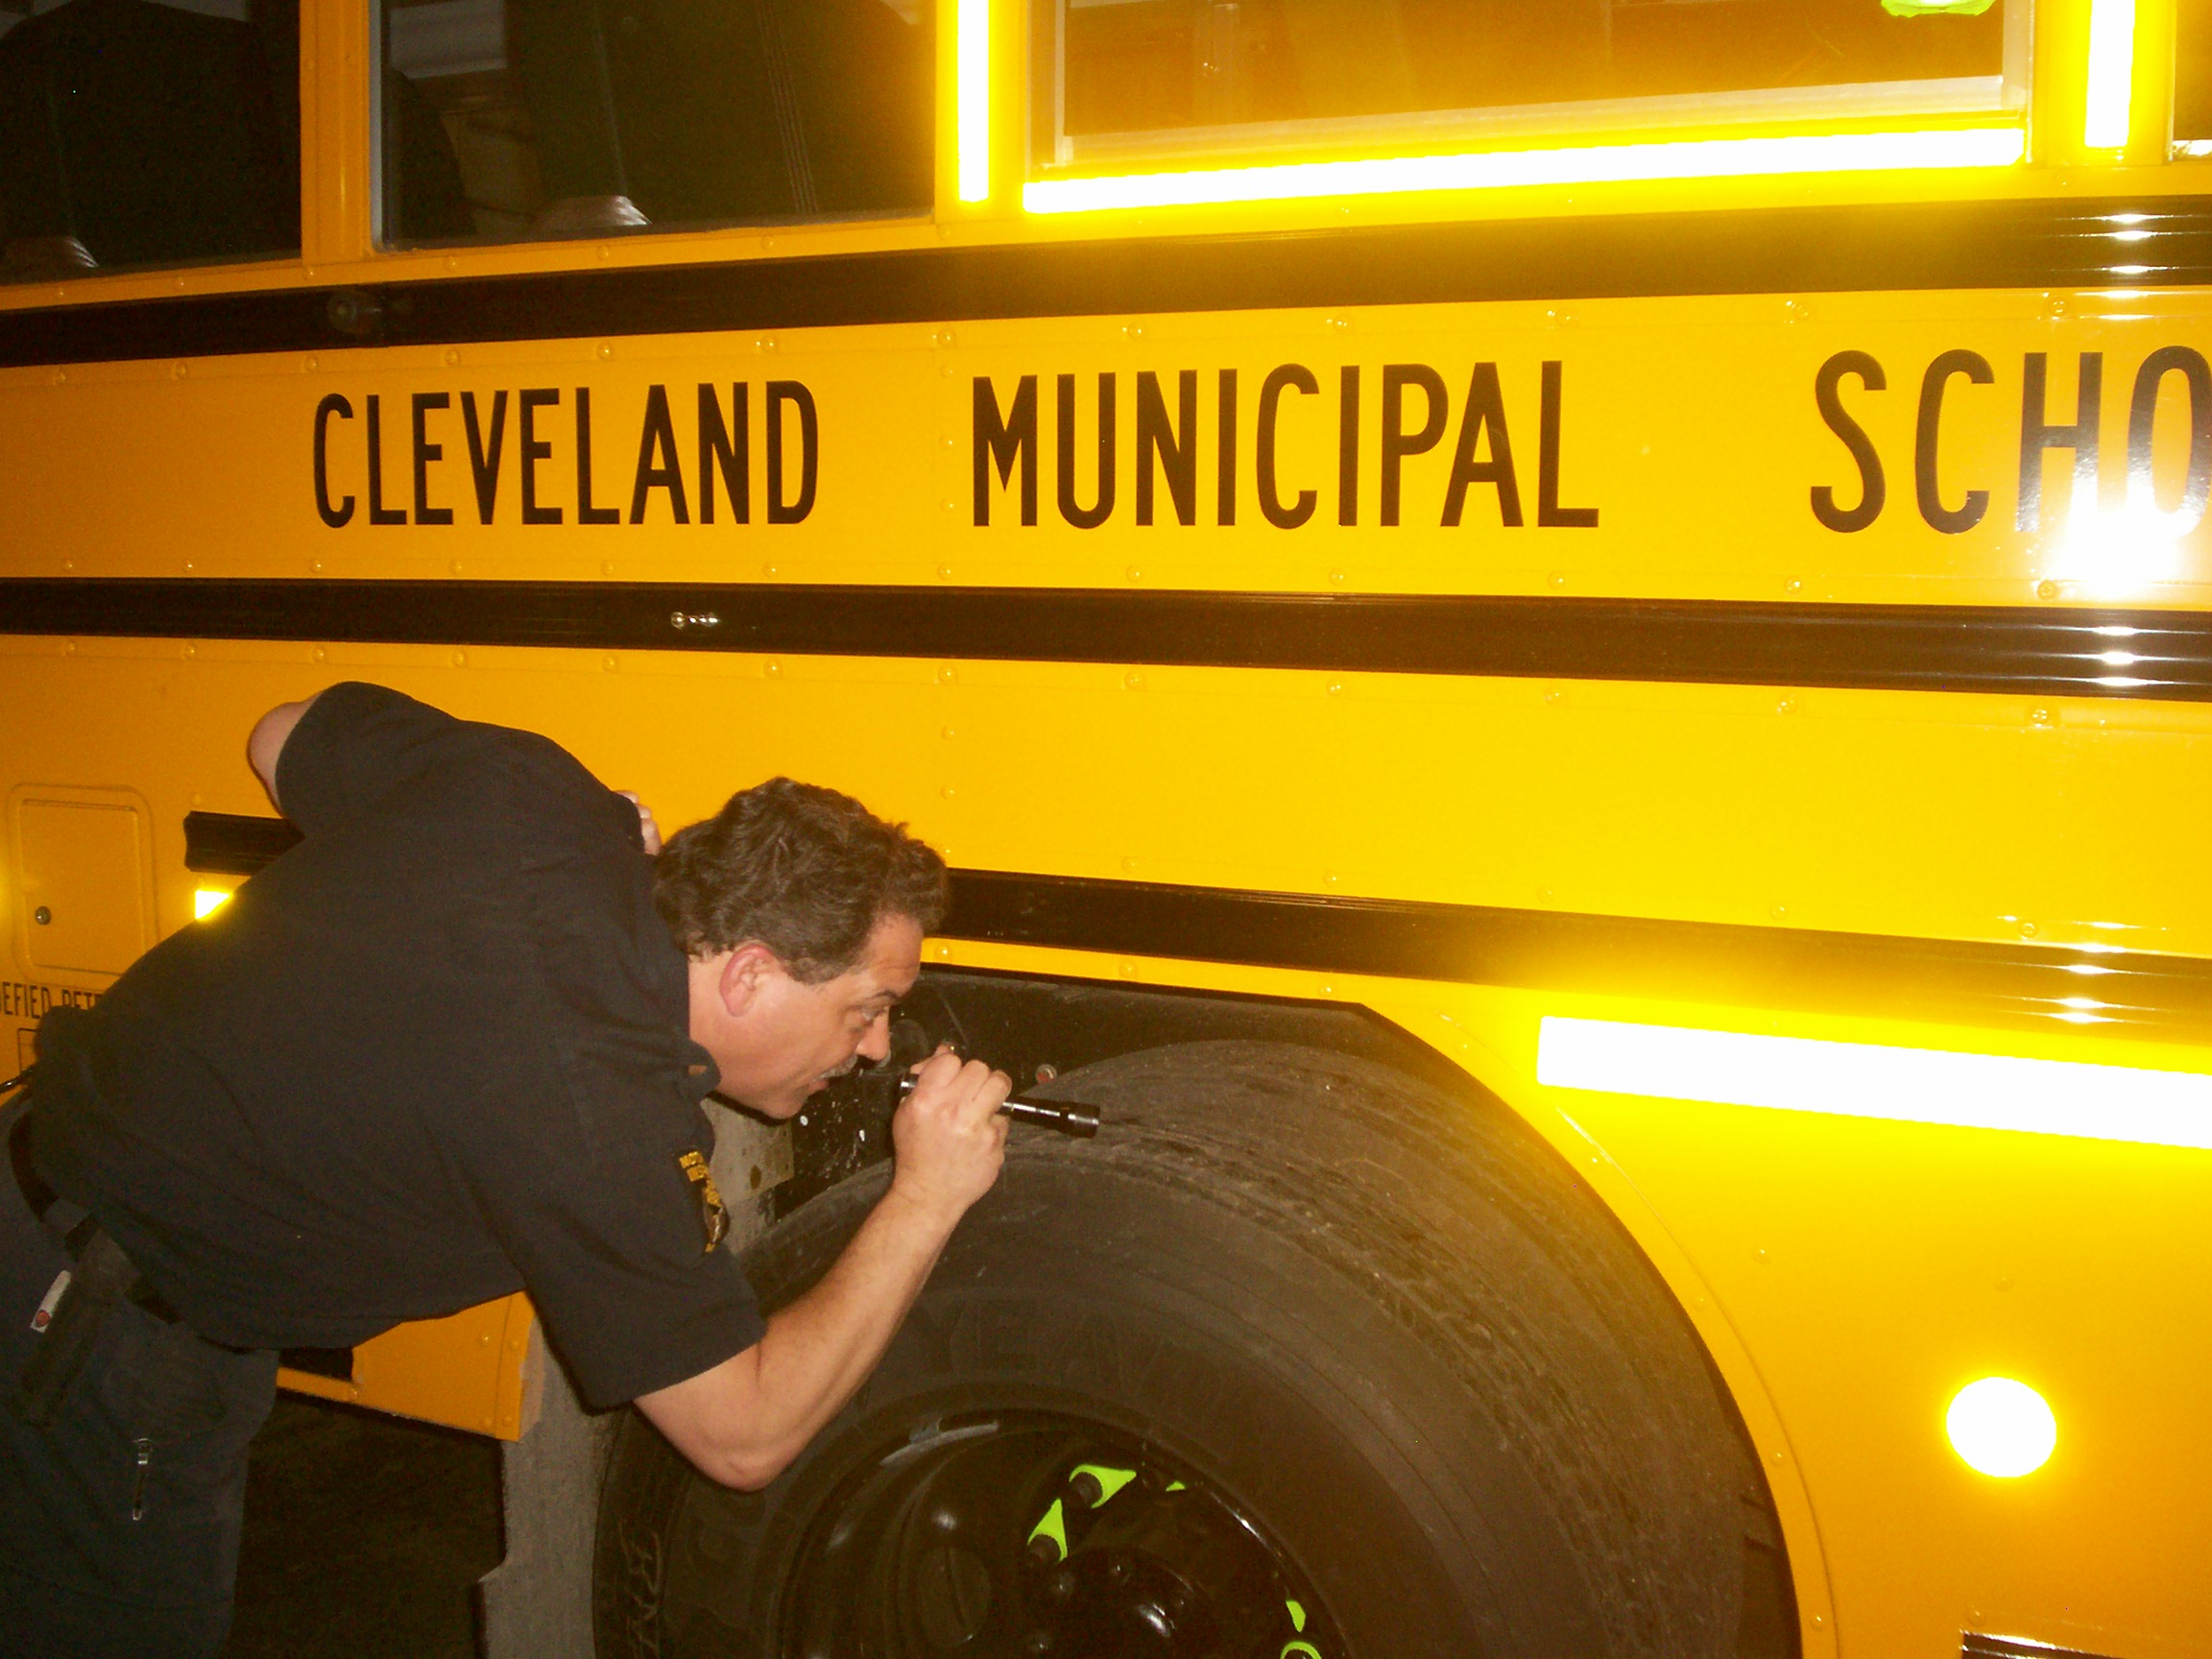 Ohio state inspector John Rose examines one of Cleveland School's new school buses fueled by clean and economical propane autogas.